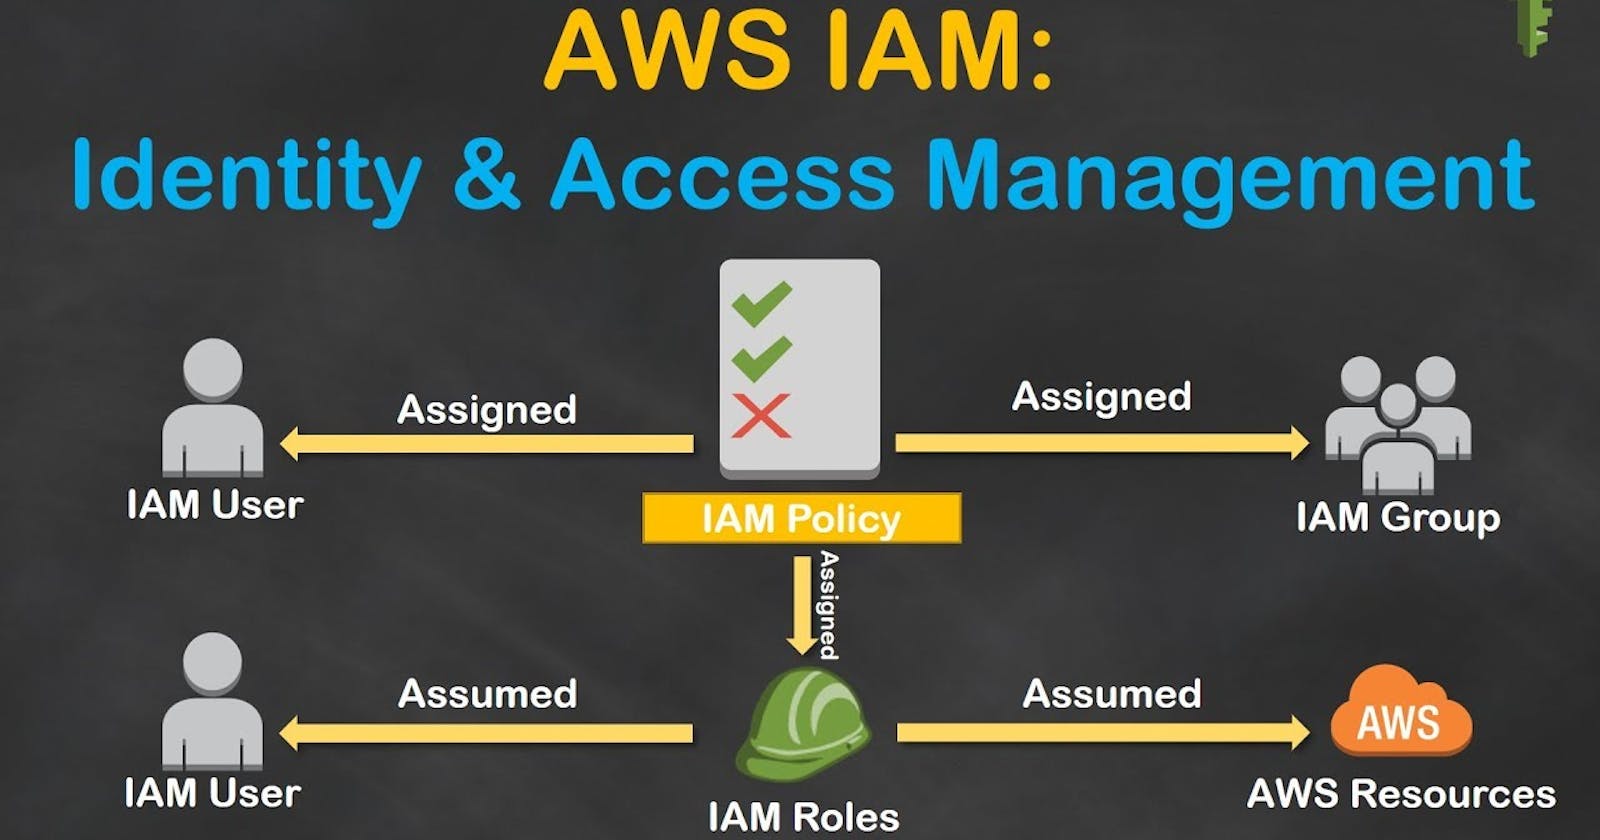 More about IAM roles in AWS